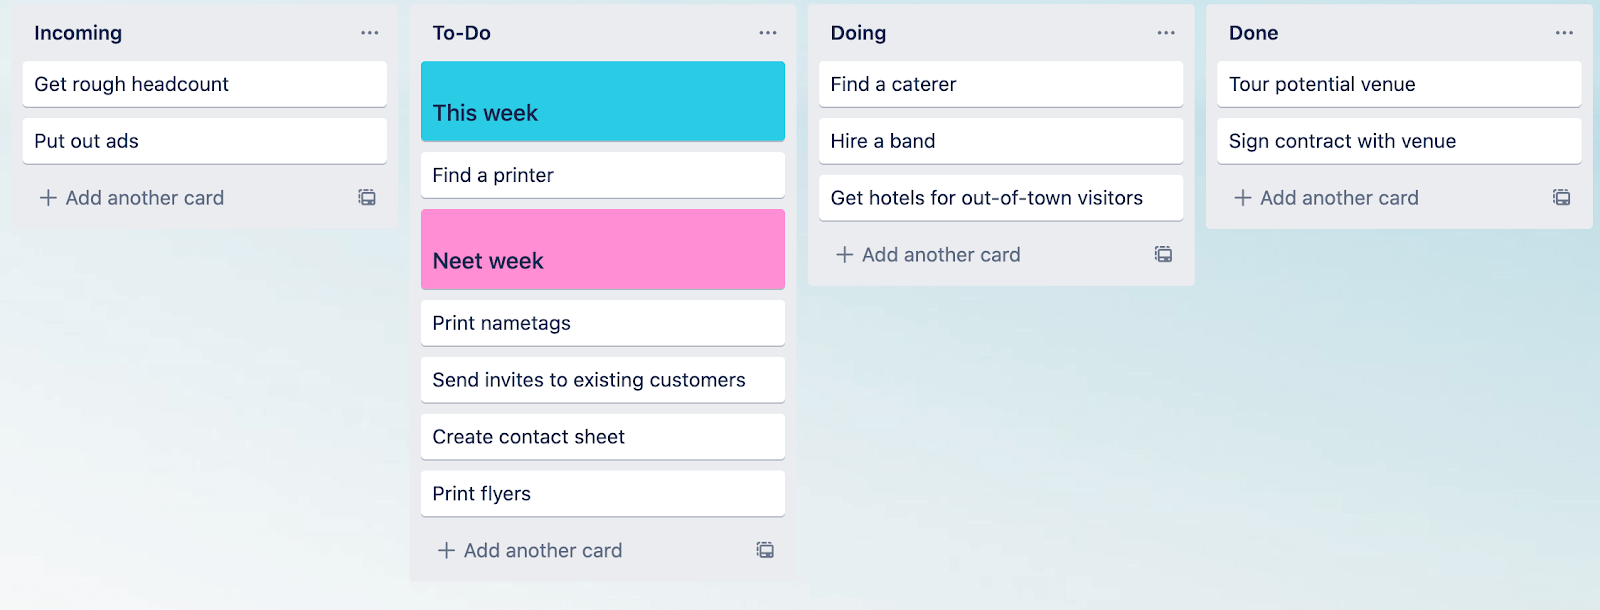 image of lists on a trello board